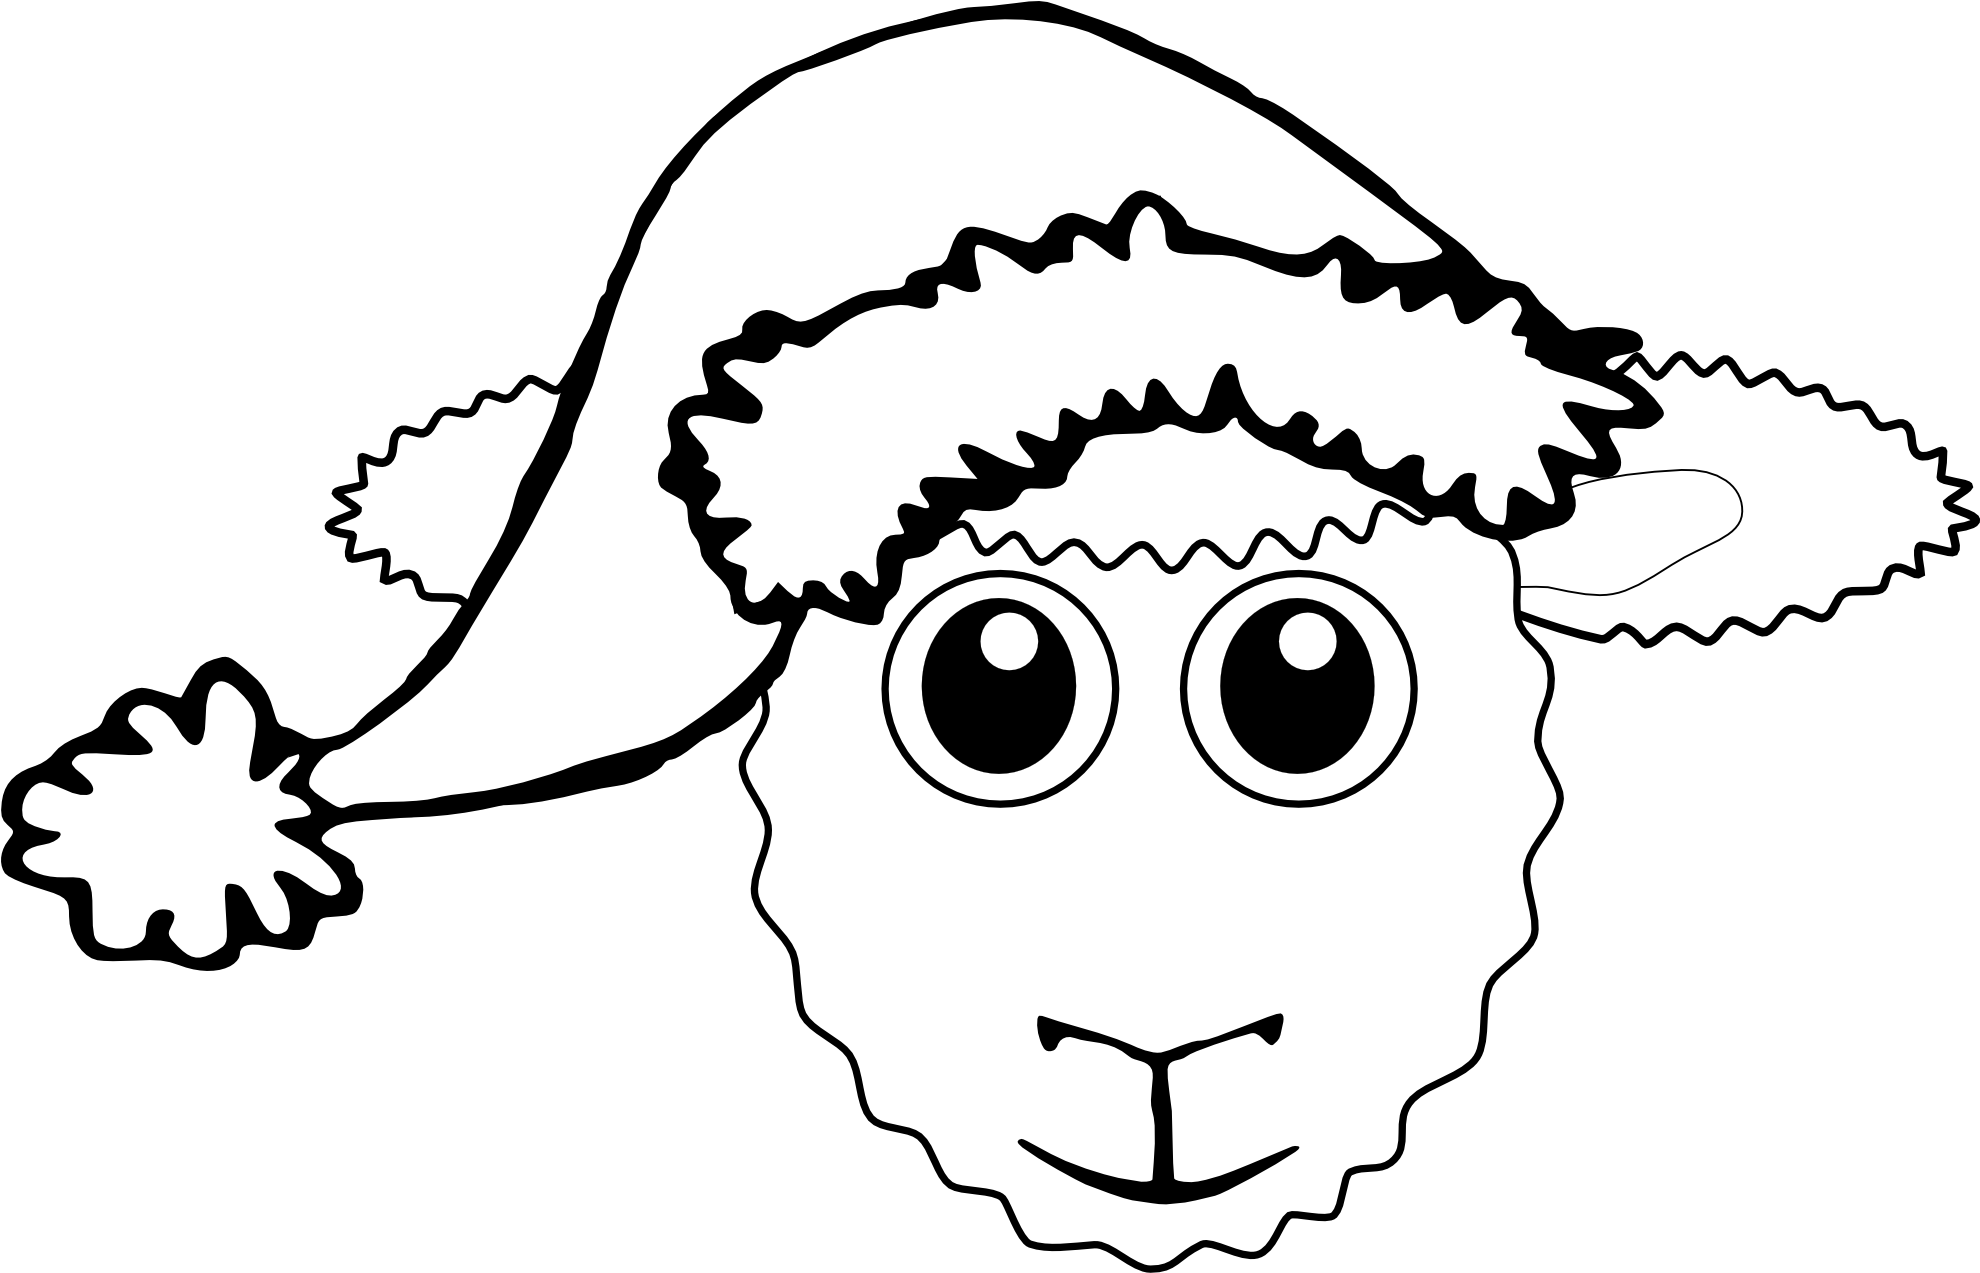 A Cartoon Of A Sheep With A Hat